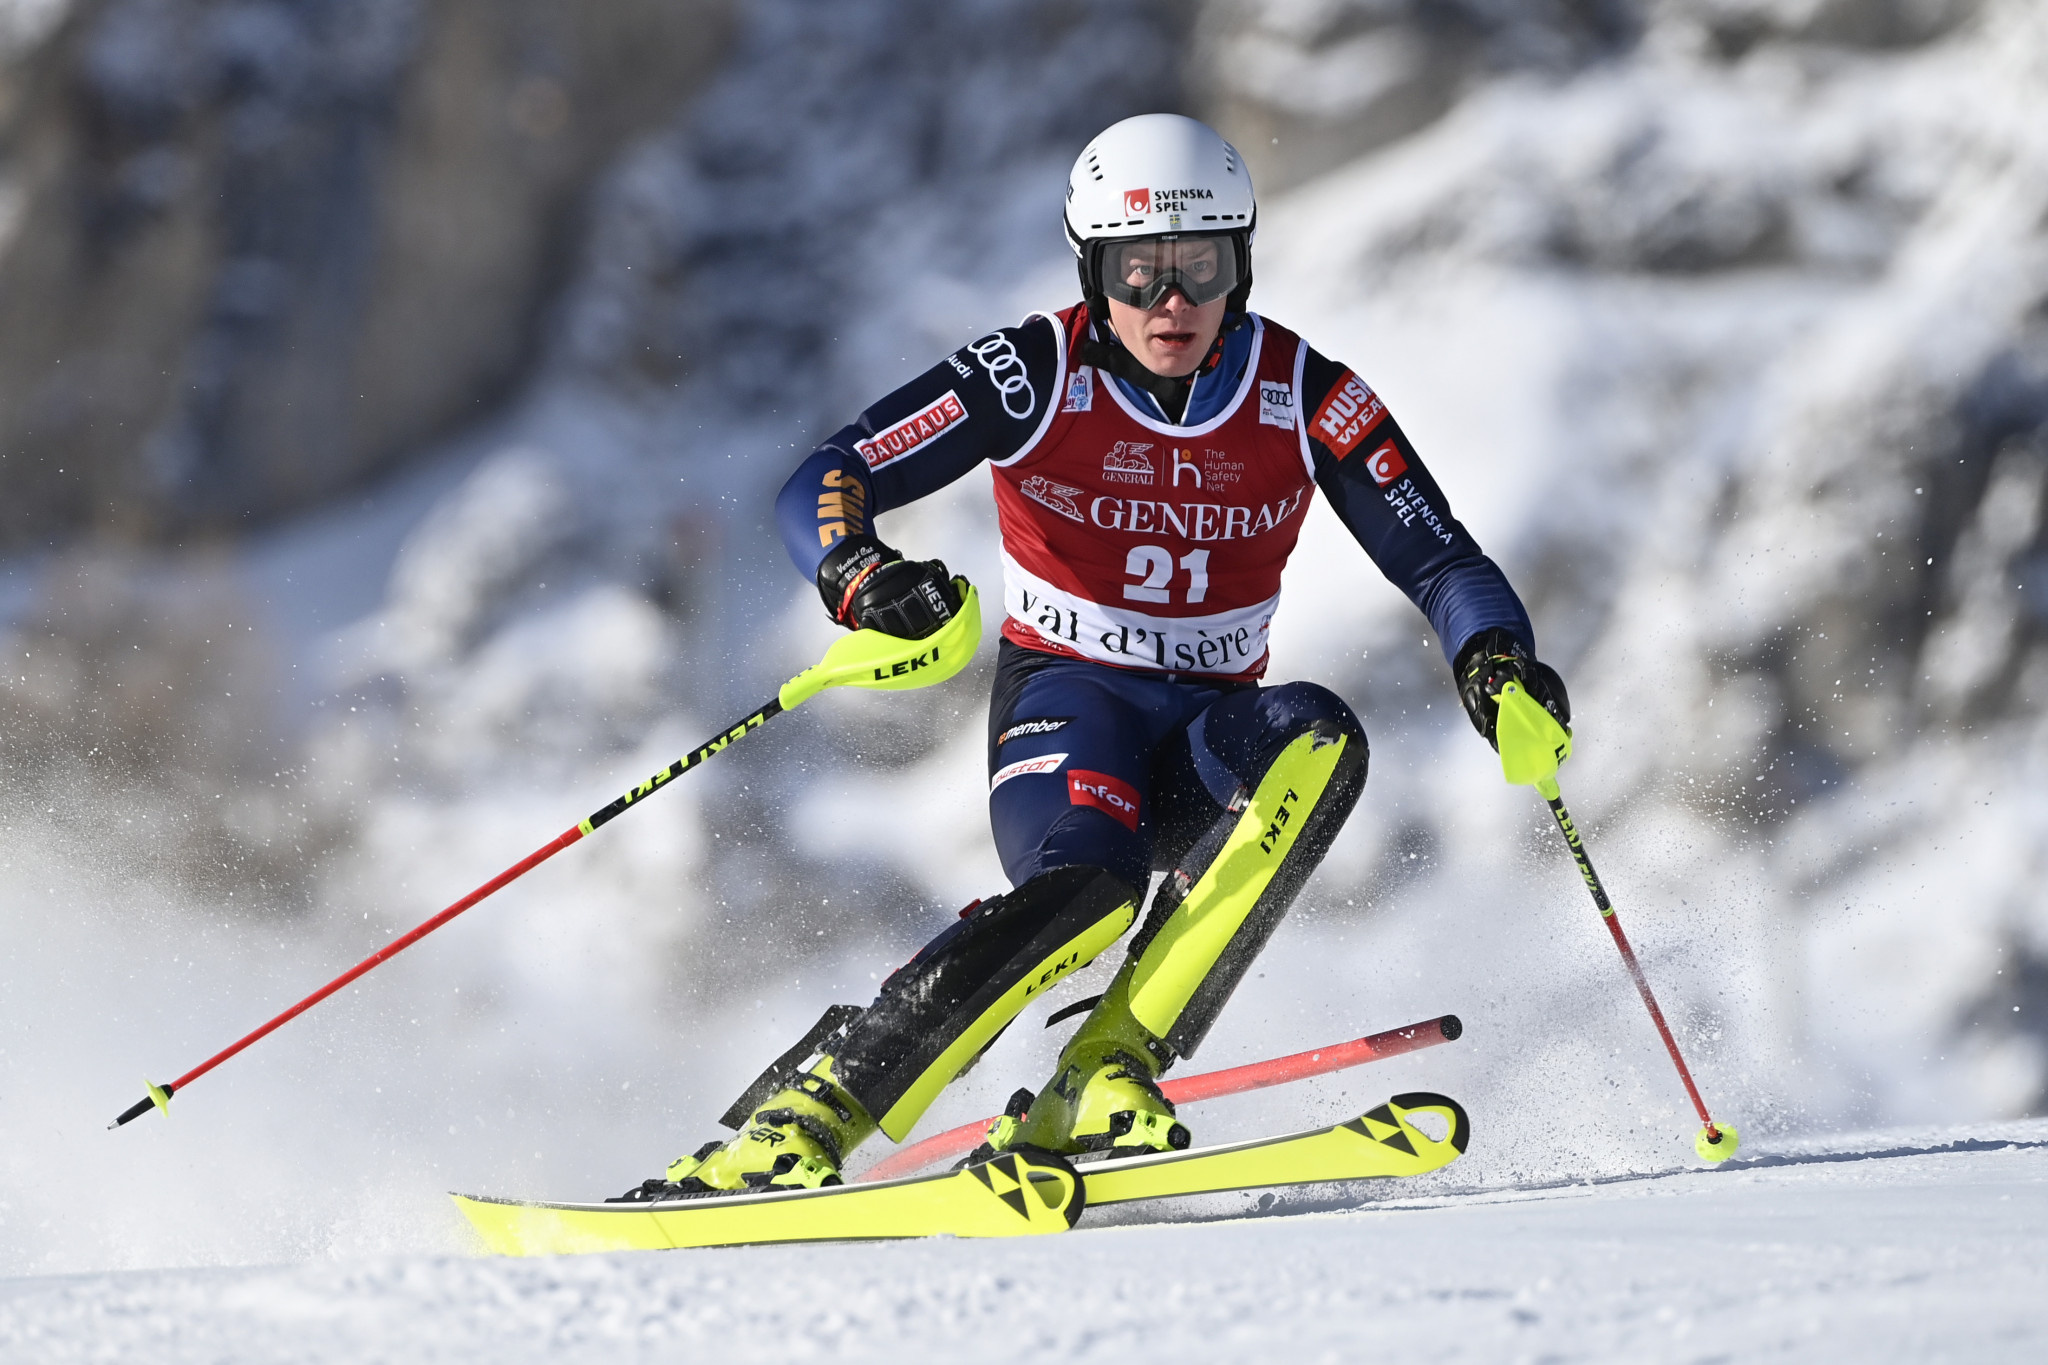 Nol's victory in the first slalom, Men's Alpine Skiing World Cup, Exciting start to the season, 2050x1370 HD Desktop